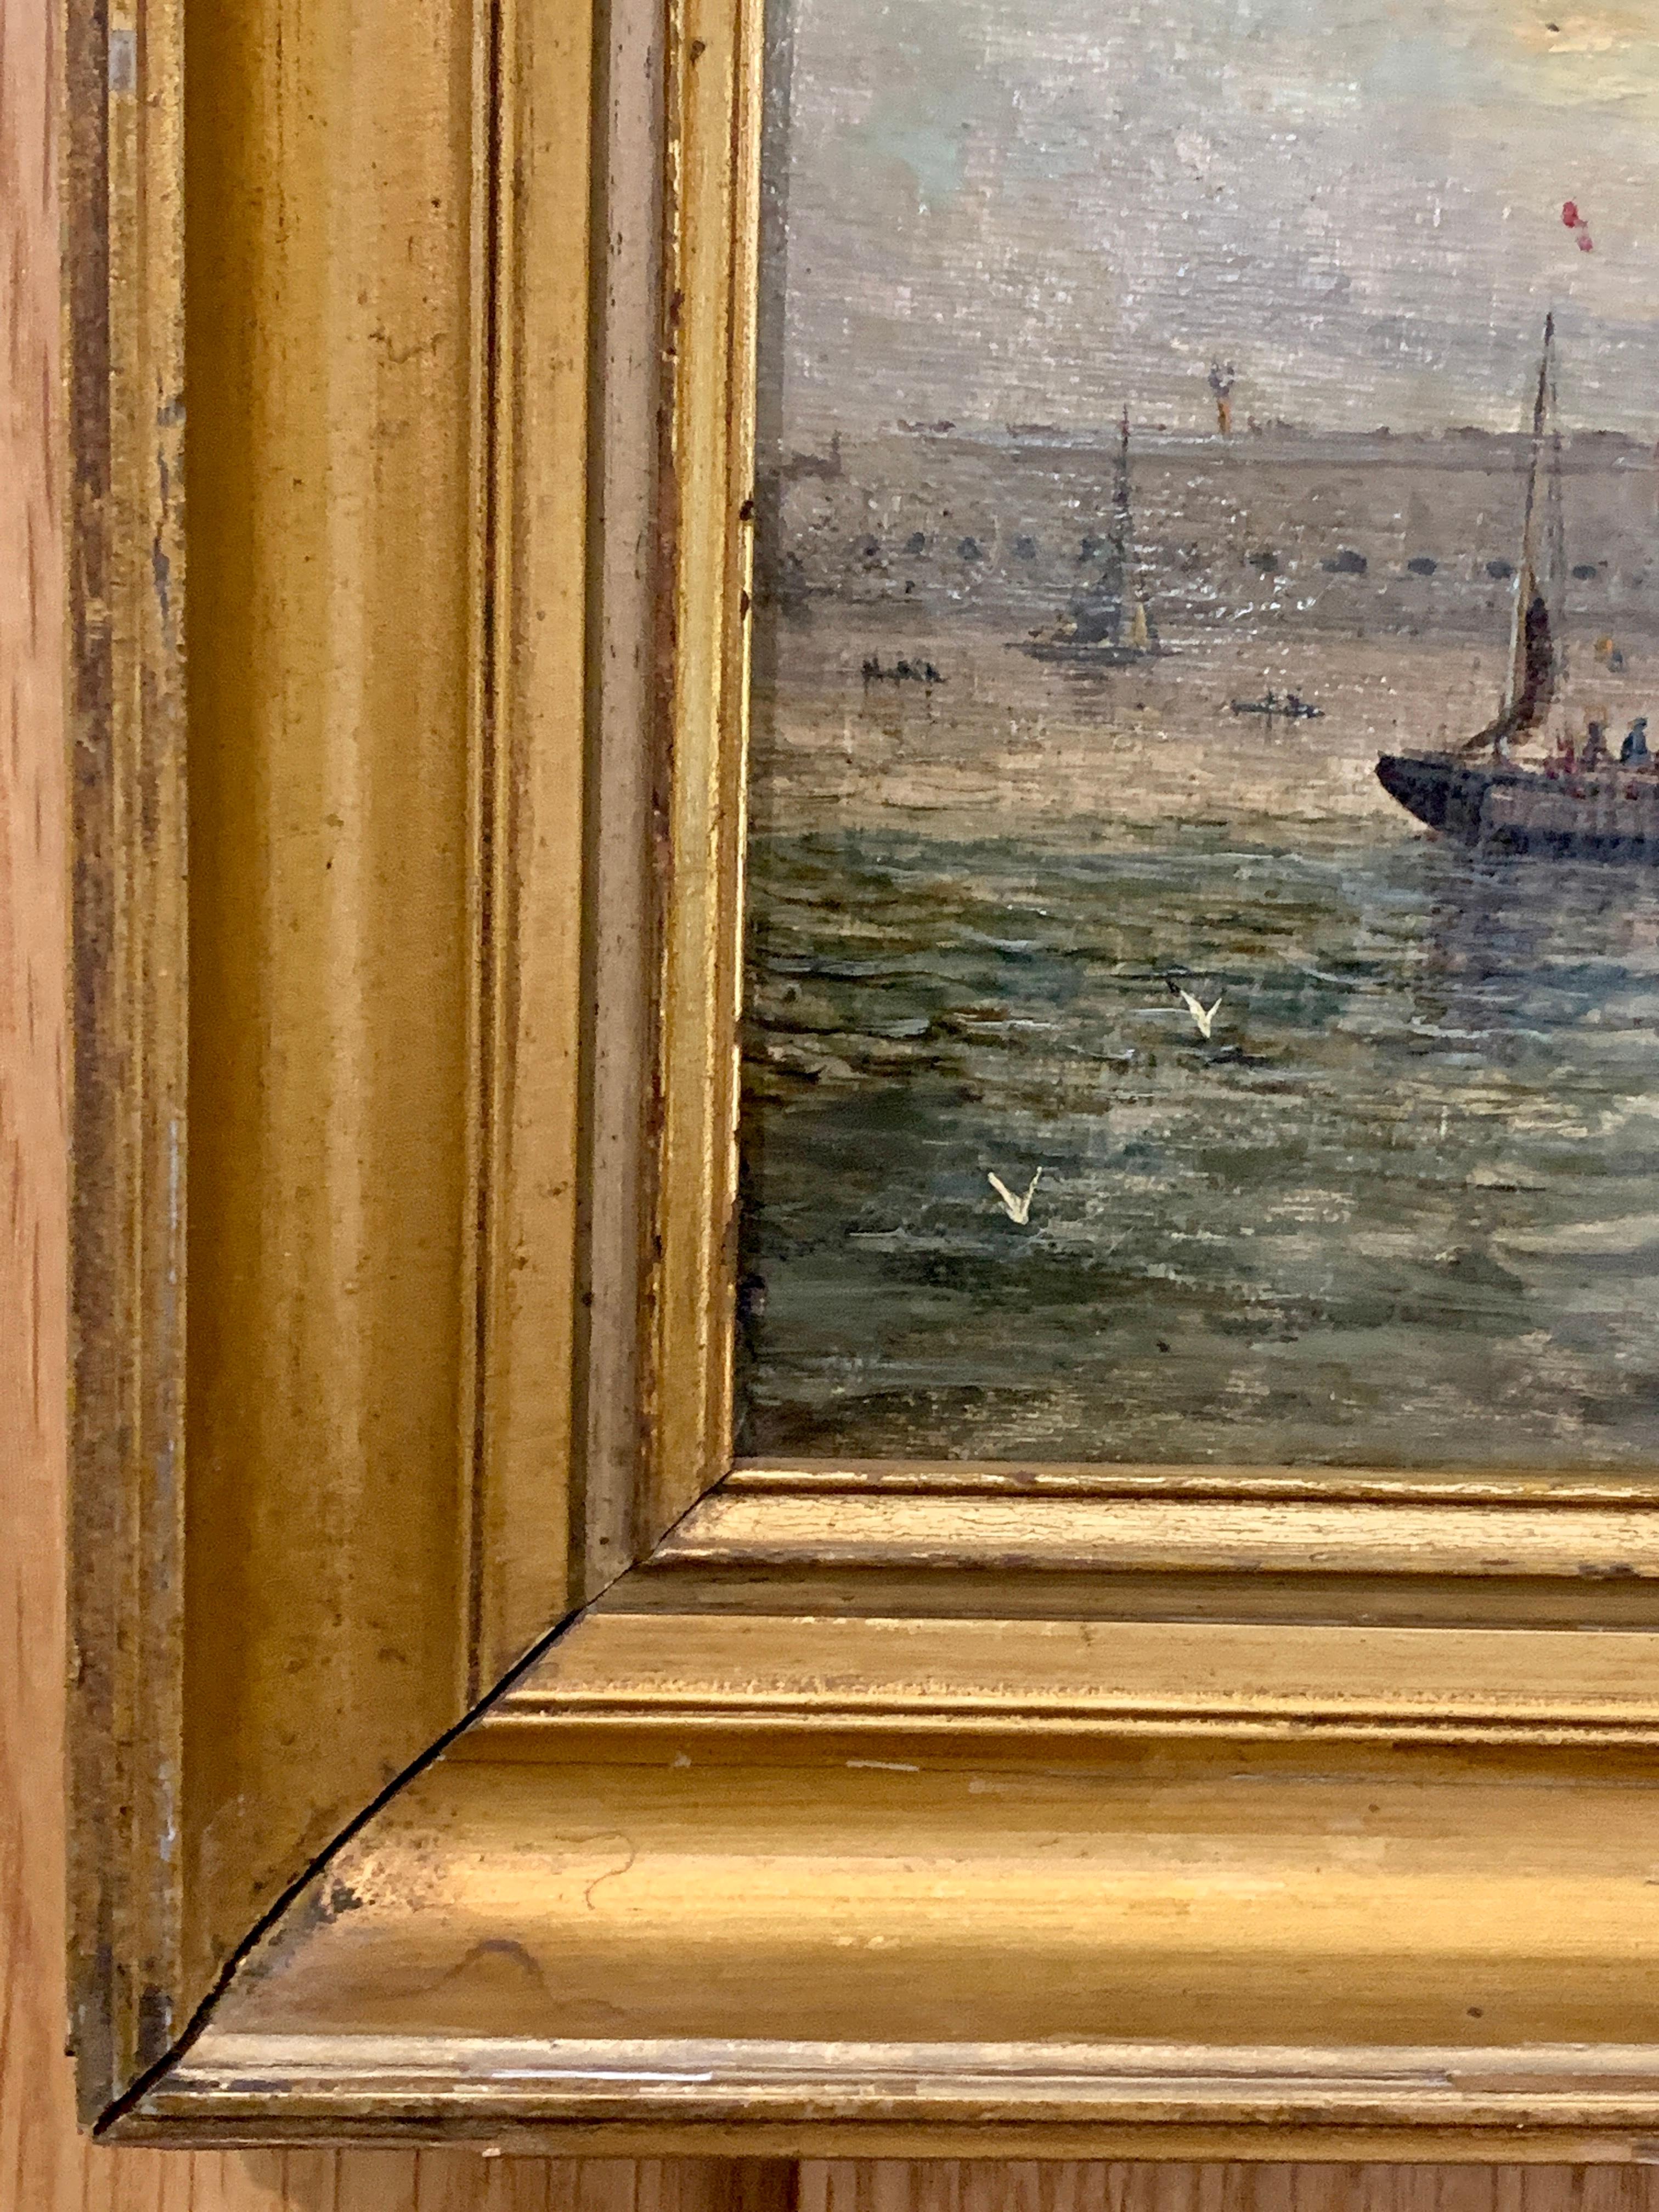 English 19th century Victorian Sailing scene, with fishing vessels off of a landscape, possibly Portsmouth Harbor.

Outstanding Victorian marine scene of a yacht at sail possible in the English Channel. We believe the work to be Adolphus Knell but